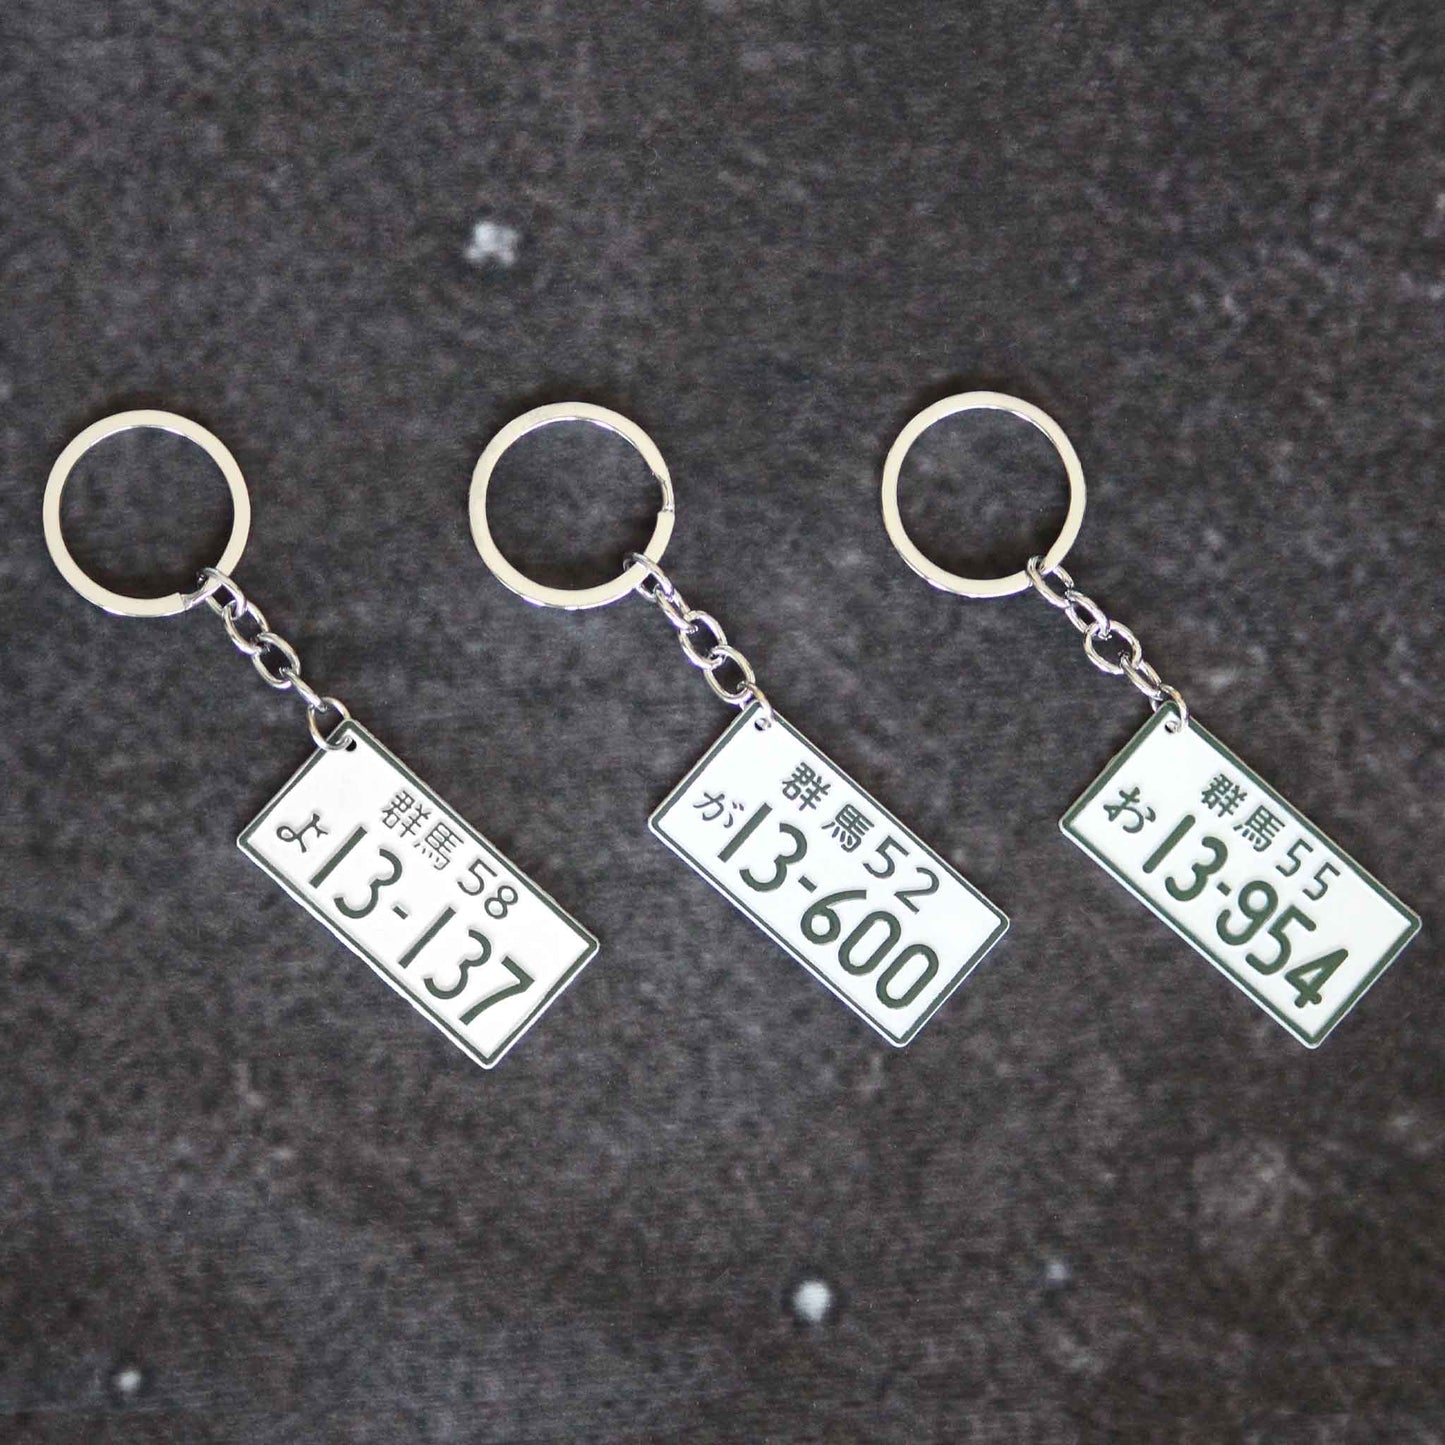 Three metal keychains featuring different number plates placed neatly on a grey background